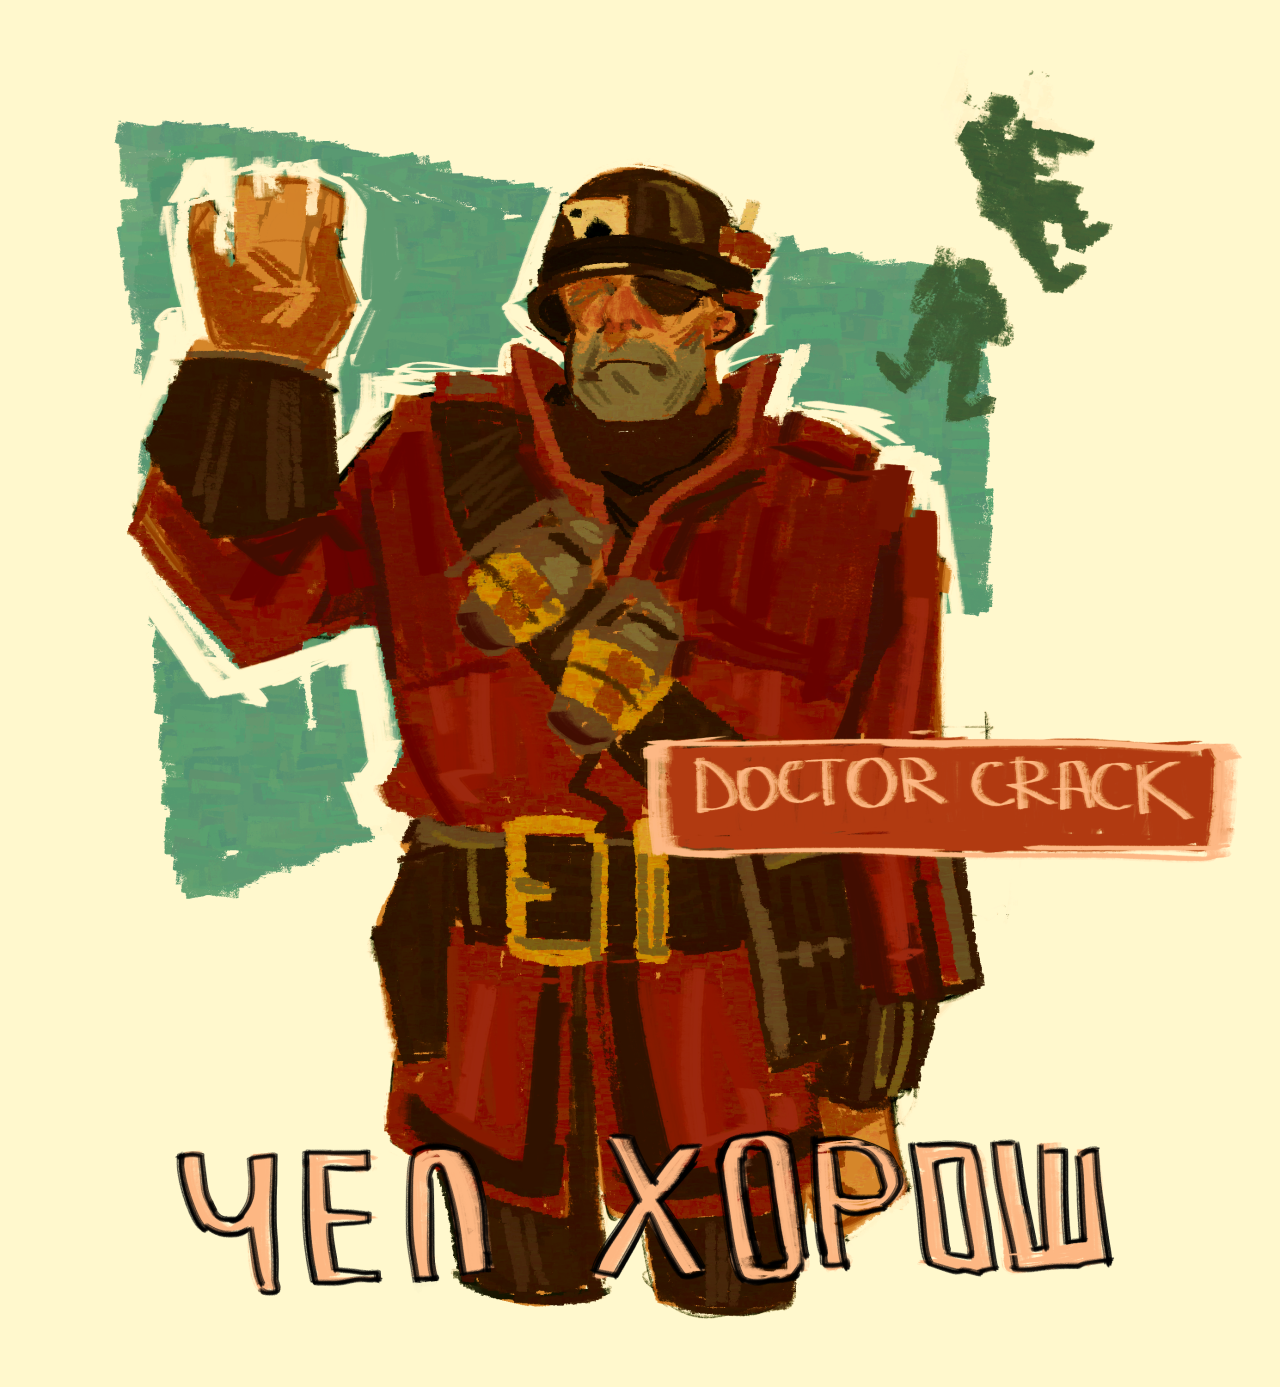 Just arts for my friends) #tf2#tf2 soldier#tf2 demo #team fortress 2